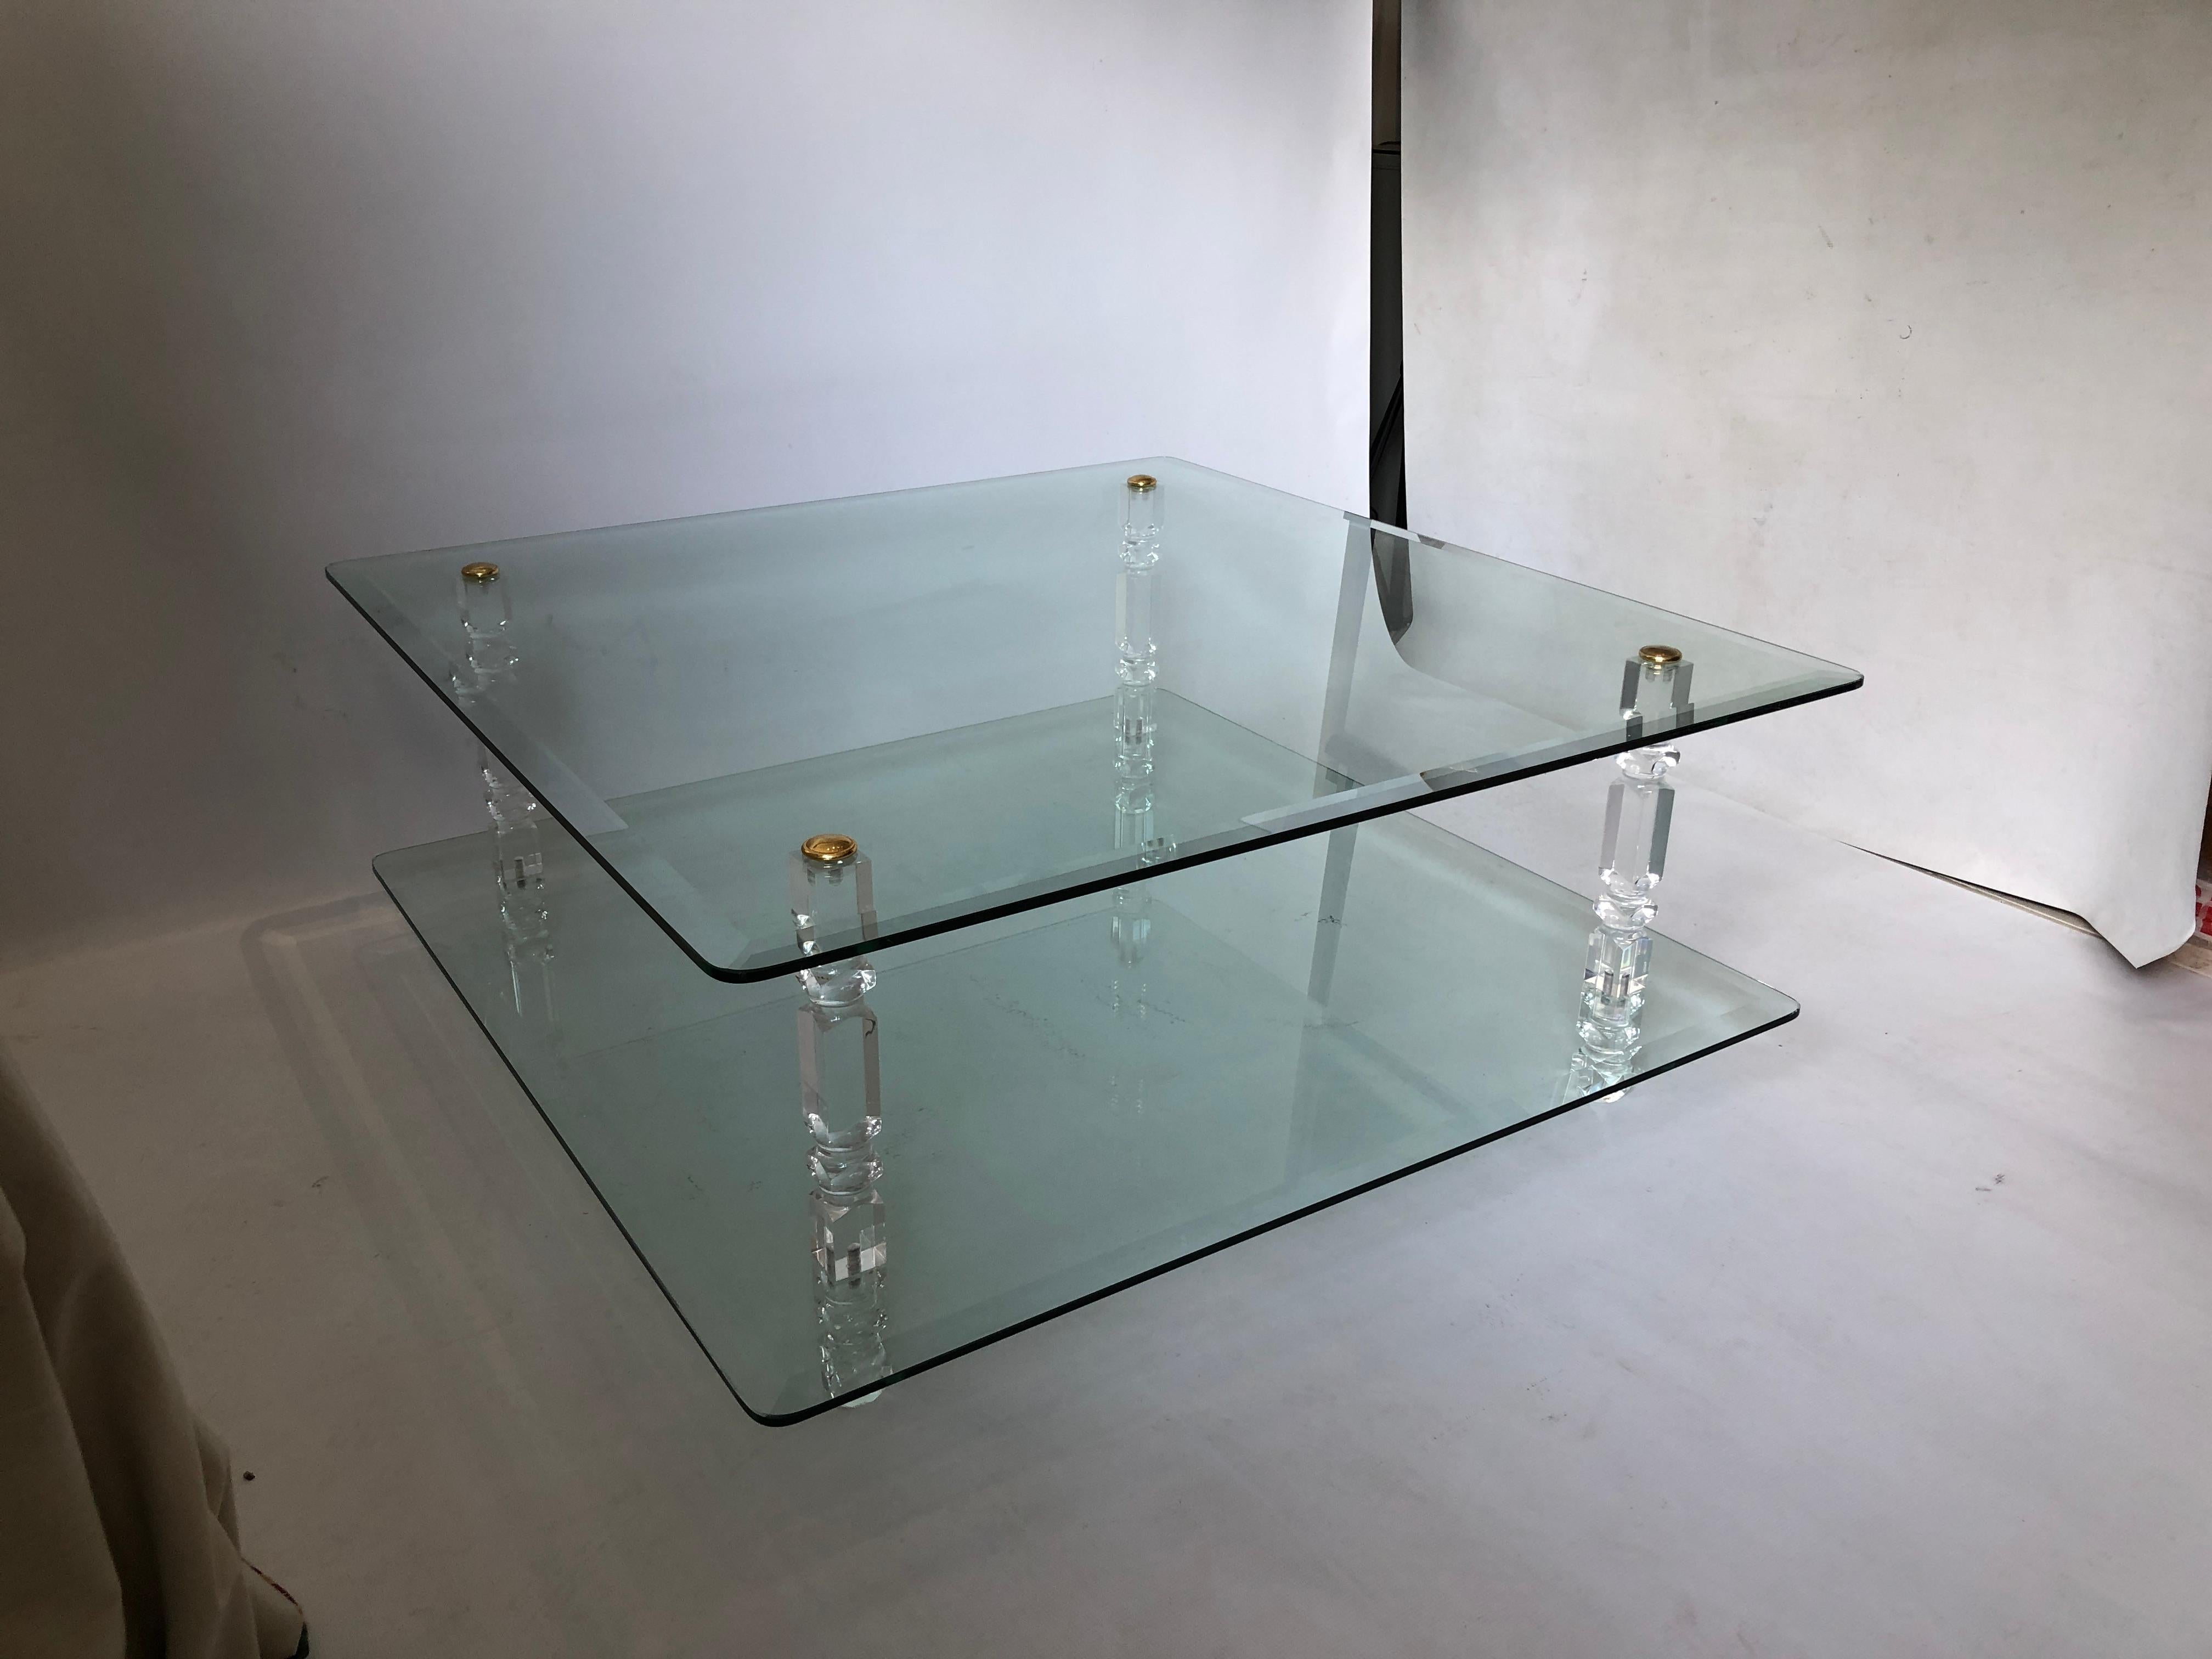 This large, two-tiered coffee table is composed of two square sheets of bevelled, reinforced glass, gently curved at the corners. These are held in place by four ornate lucite columns, with a brass disc screw at the top to complete the piece. The